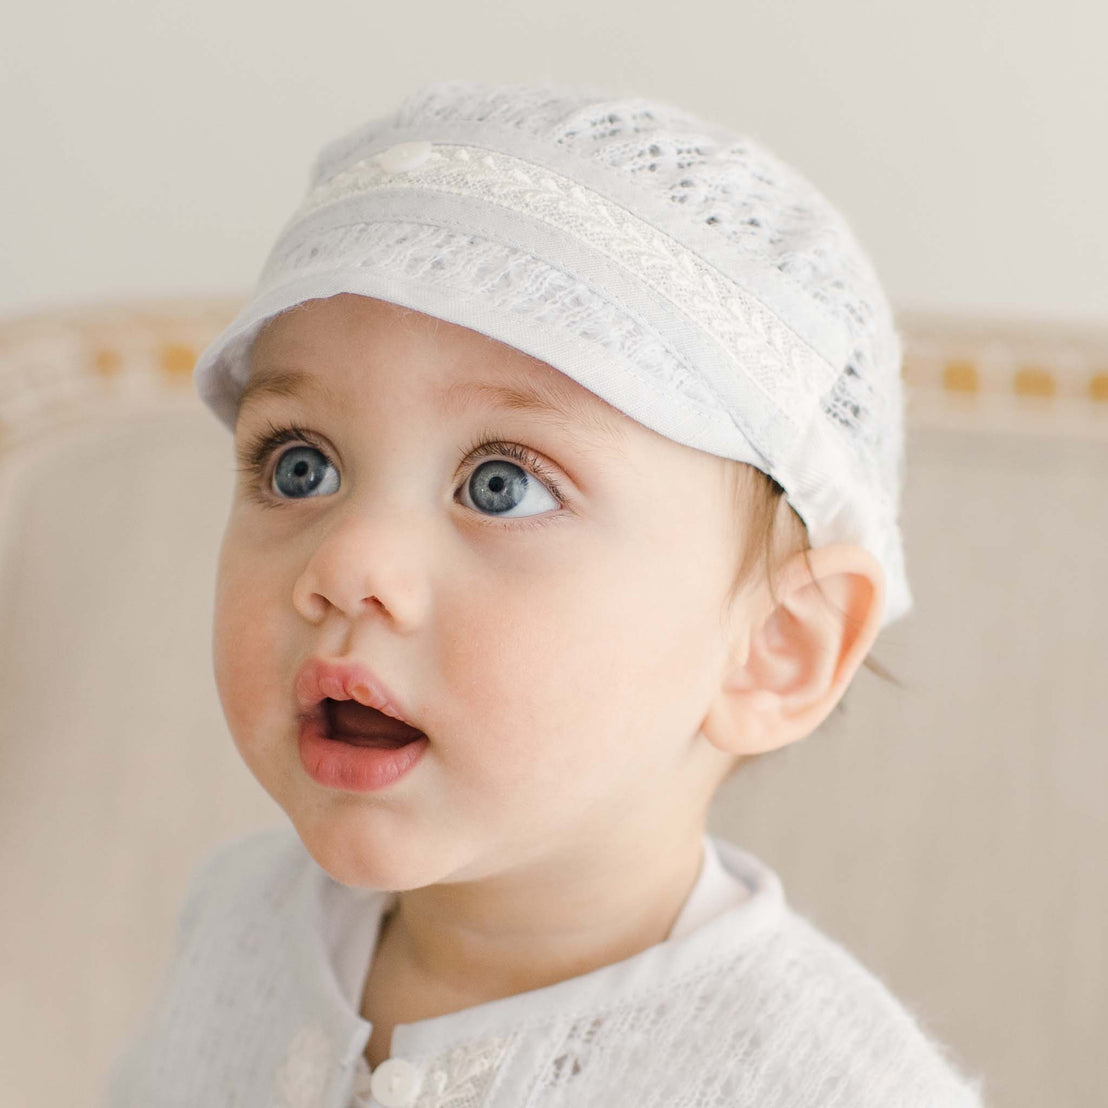 Baby boy wearing the Harrison Blue Knit Hat. The knit is detailed with soft blue linen/cotton blend edging and ivory Venice lace